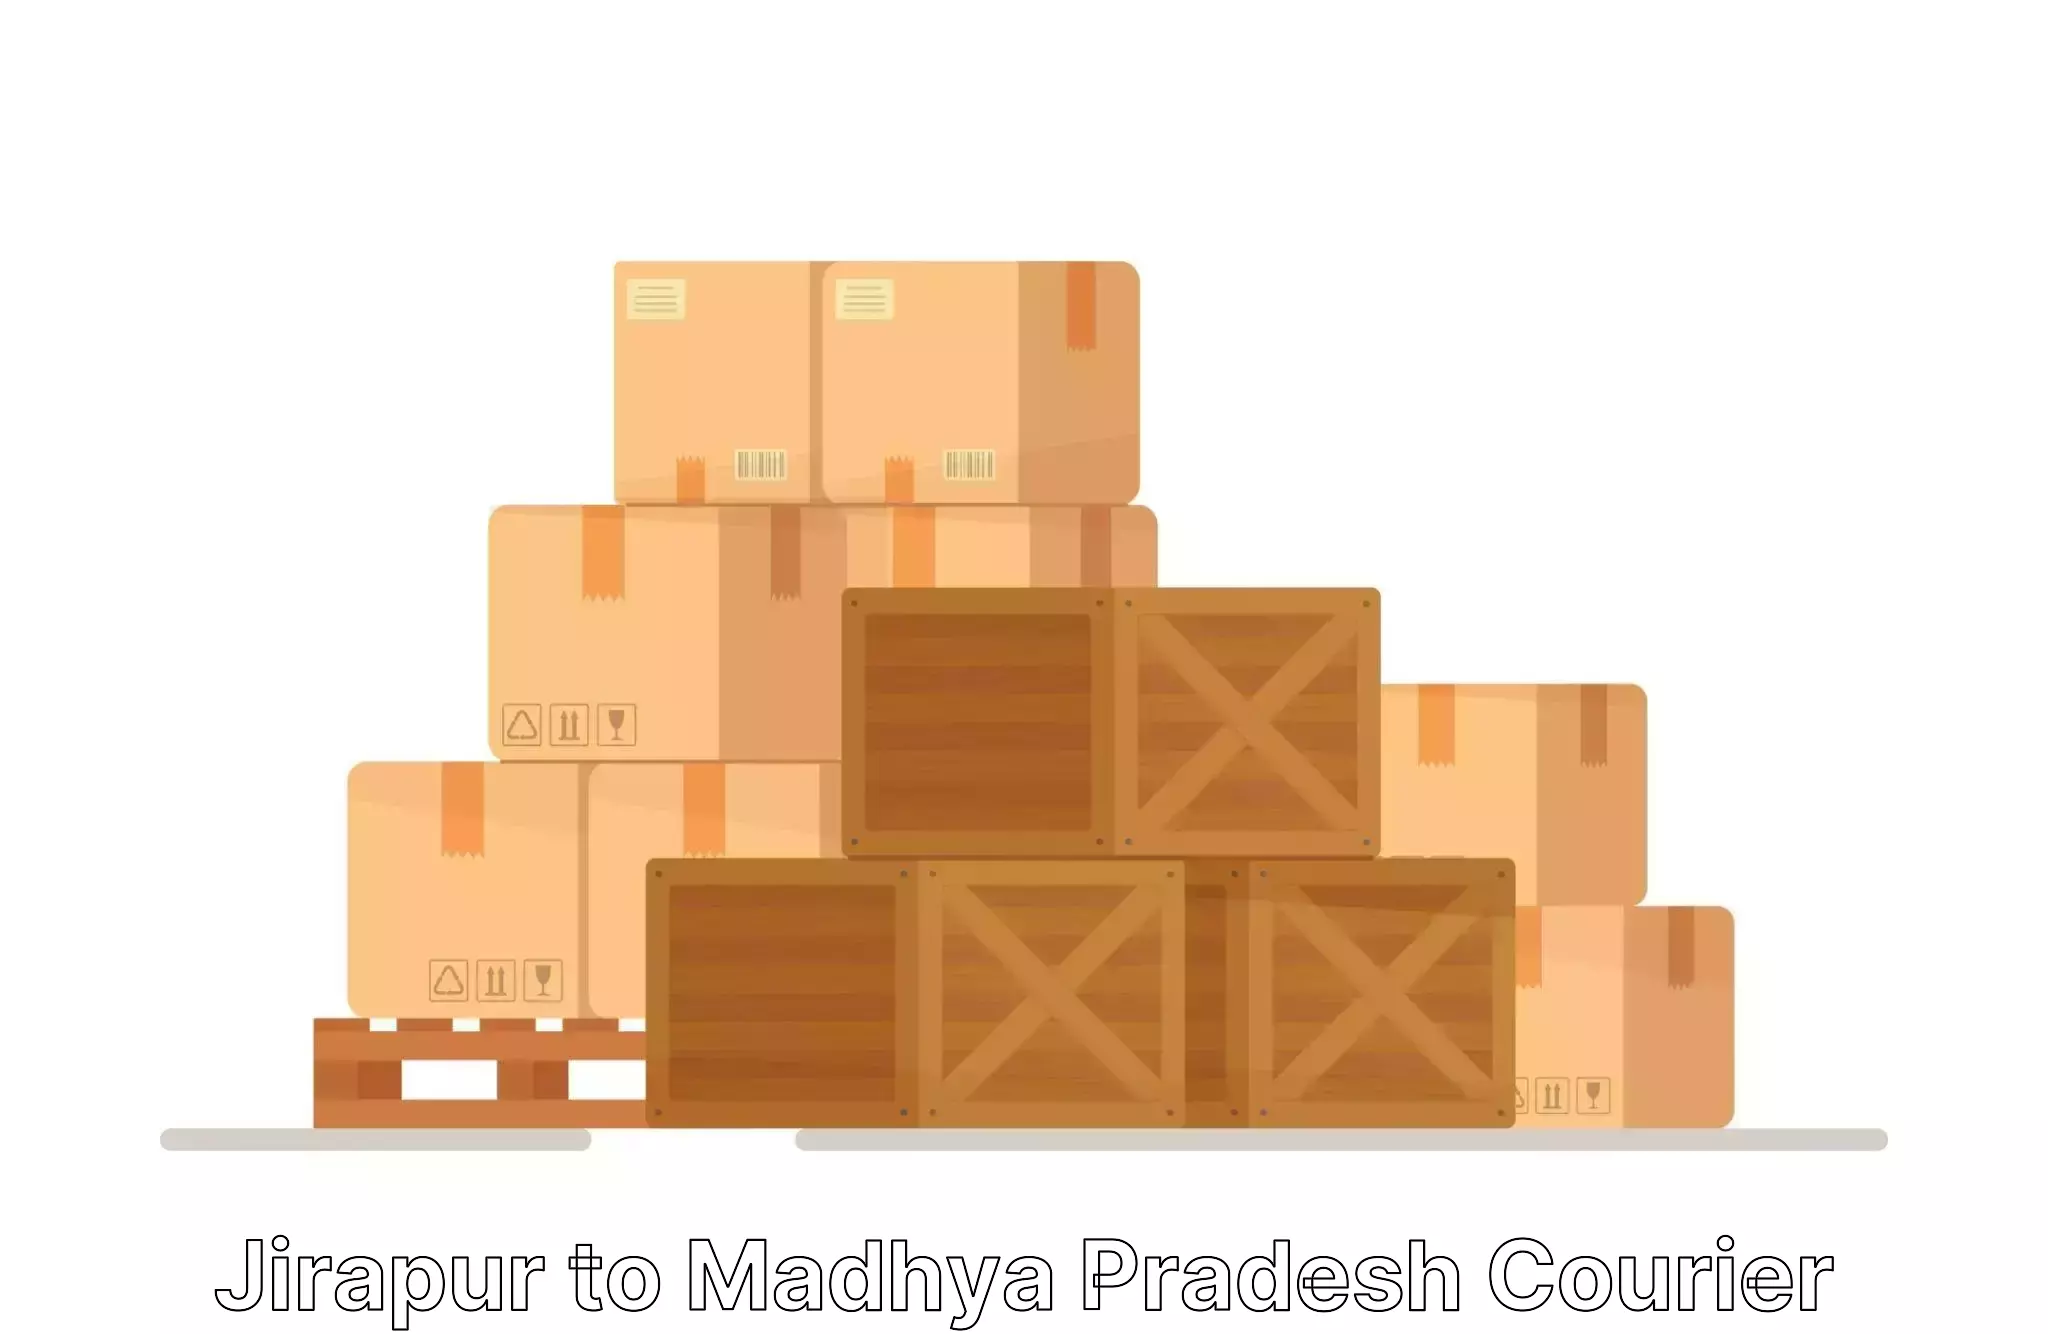 Efficient packing and moving Jirapur to Madwas